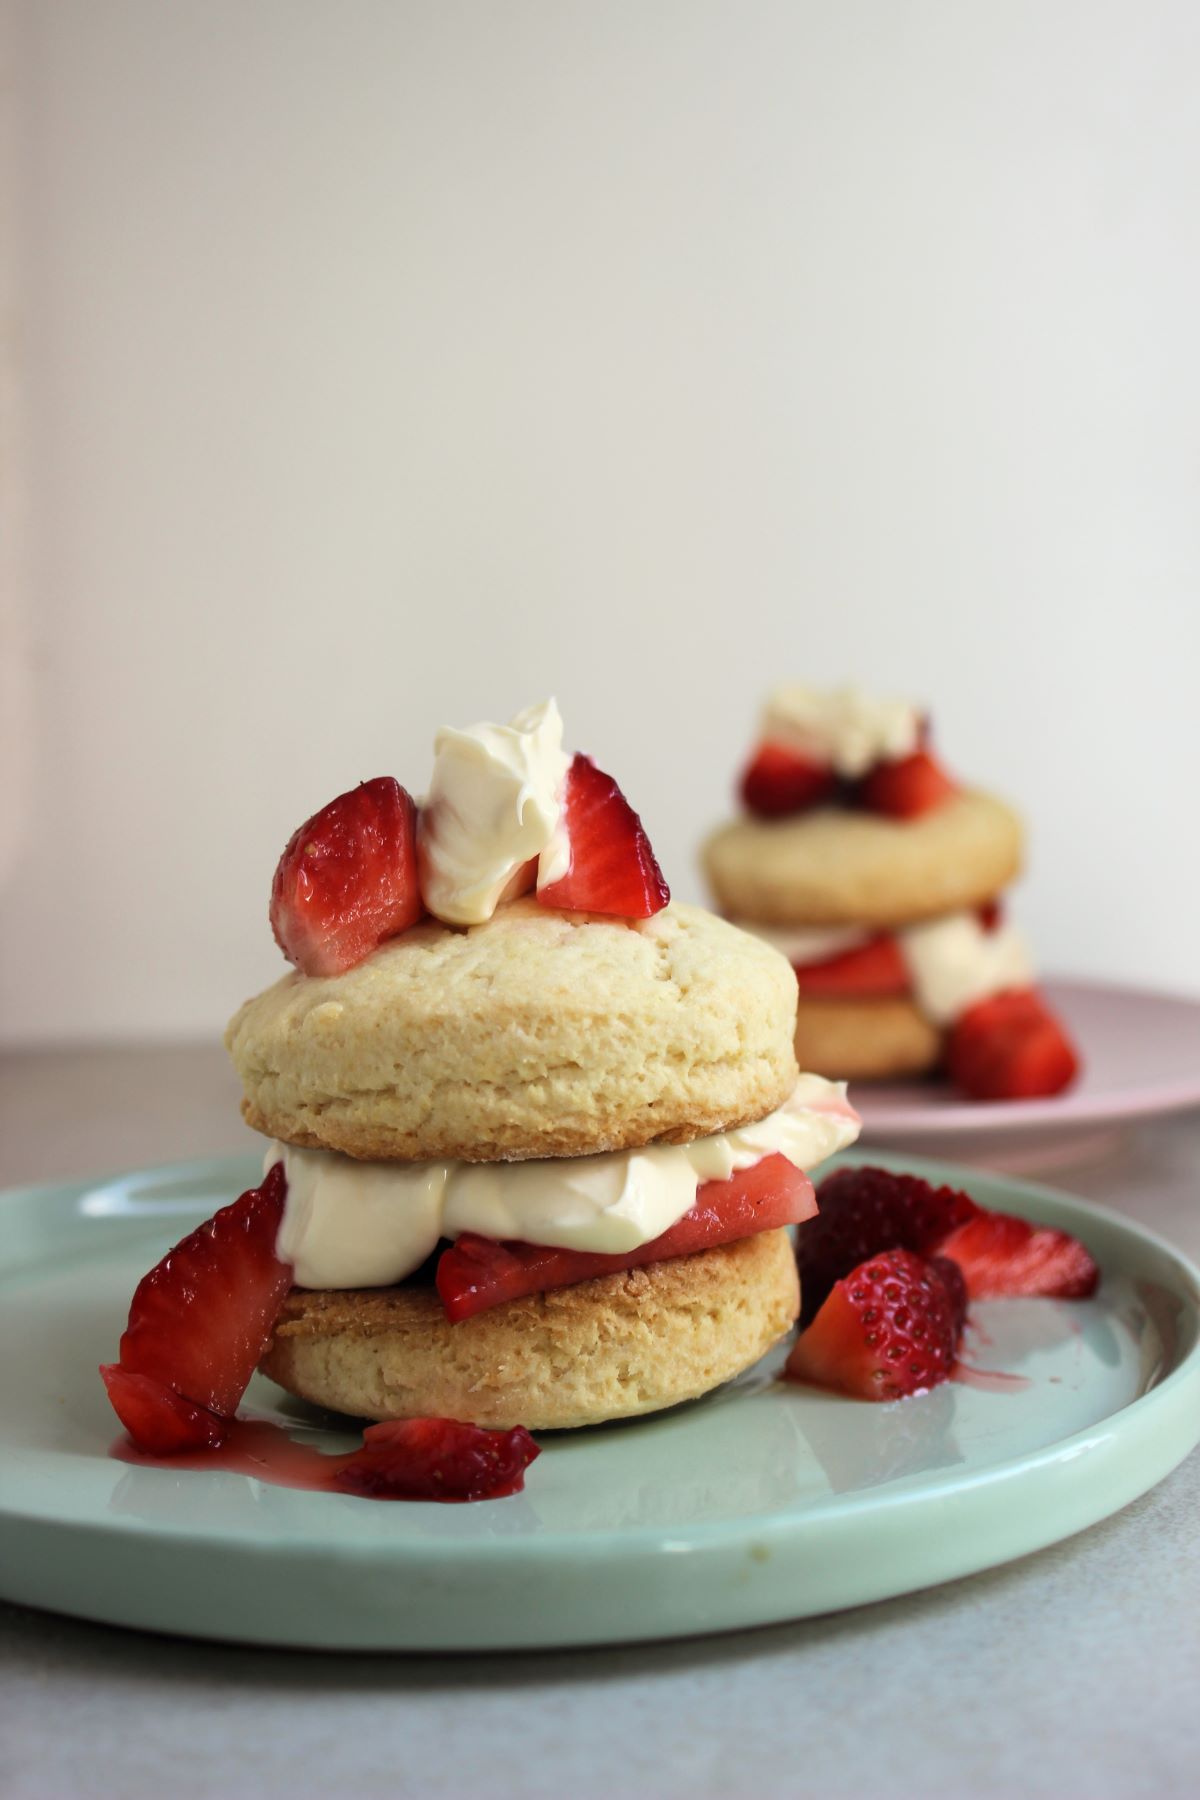 Strawberry shortcake on a plate and more strawberries on the sides. Another shortcake behind.